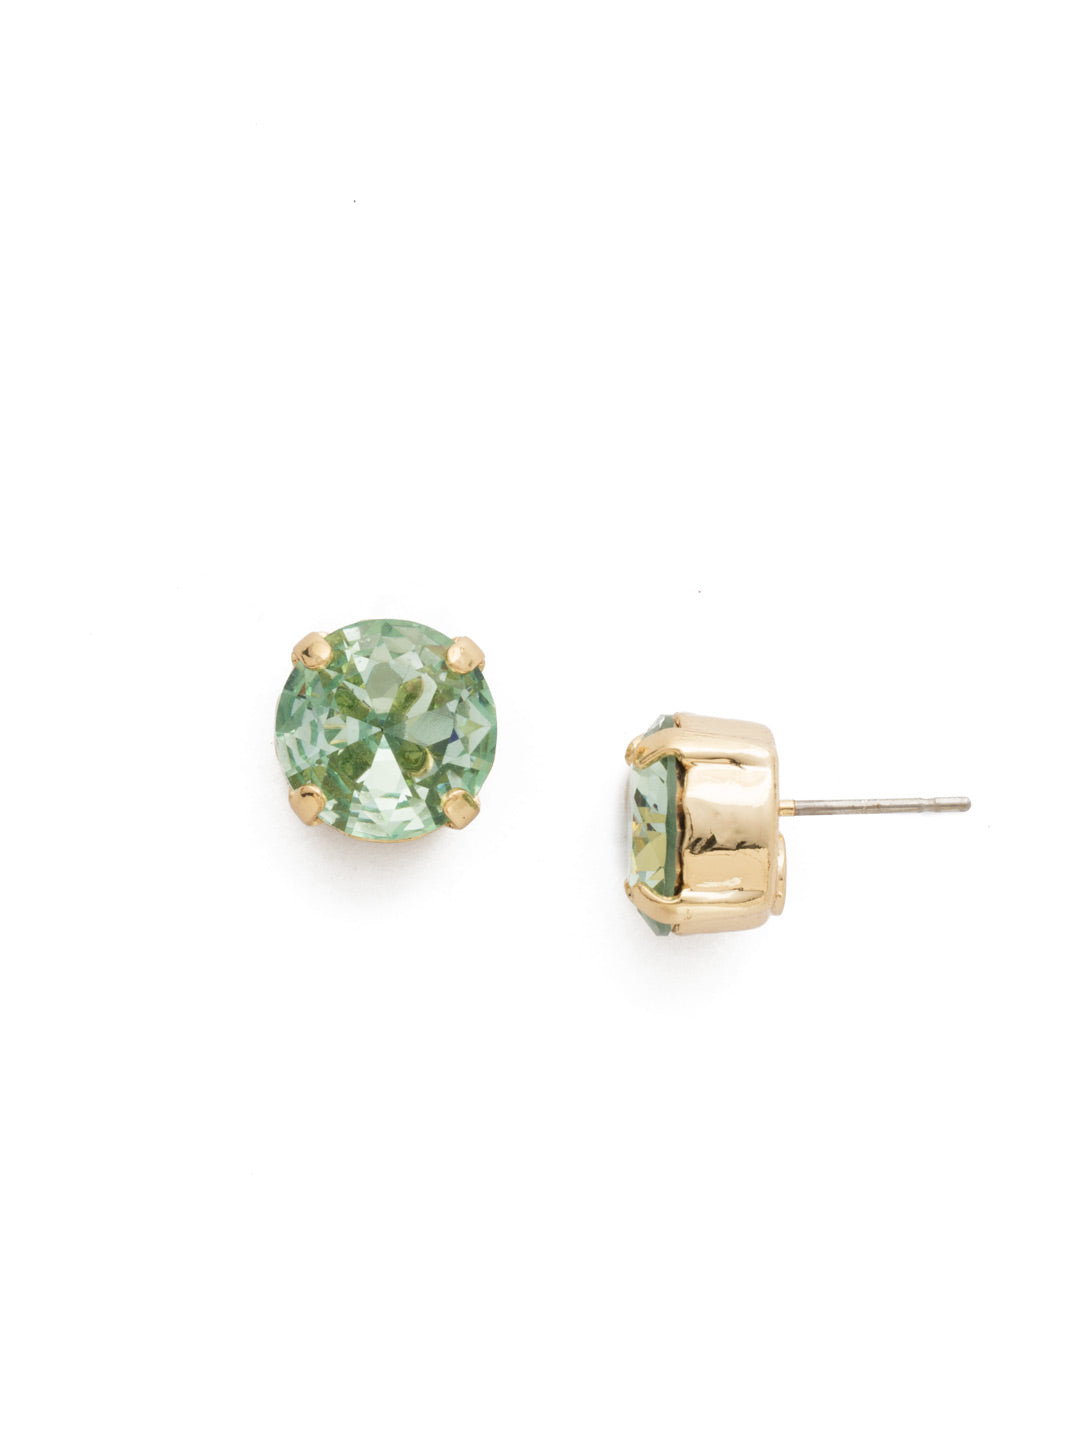 London Stud Earrings - ECM14BGMIN - <p>Everyone needs a great pair of studs. Add some classic sparkle to any occasion with these stud earrings. Need help picking a stud? <a href="https://www.sorrelli.com/blogs/sisterhood/round-stud-earrings-101-a-rundown-of-sizes-styles-and-sparkle">Check out our size guide!</a> From Sorrelli's Mint collection in our Bright Gold-tone finish.</p>